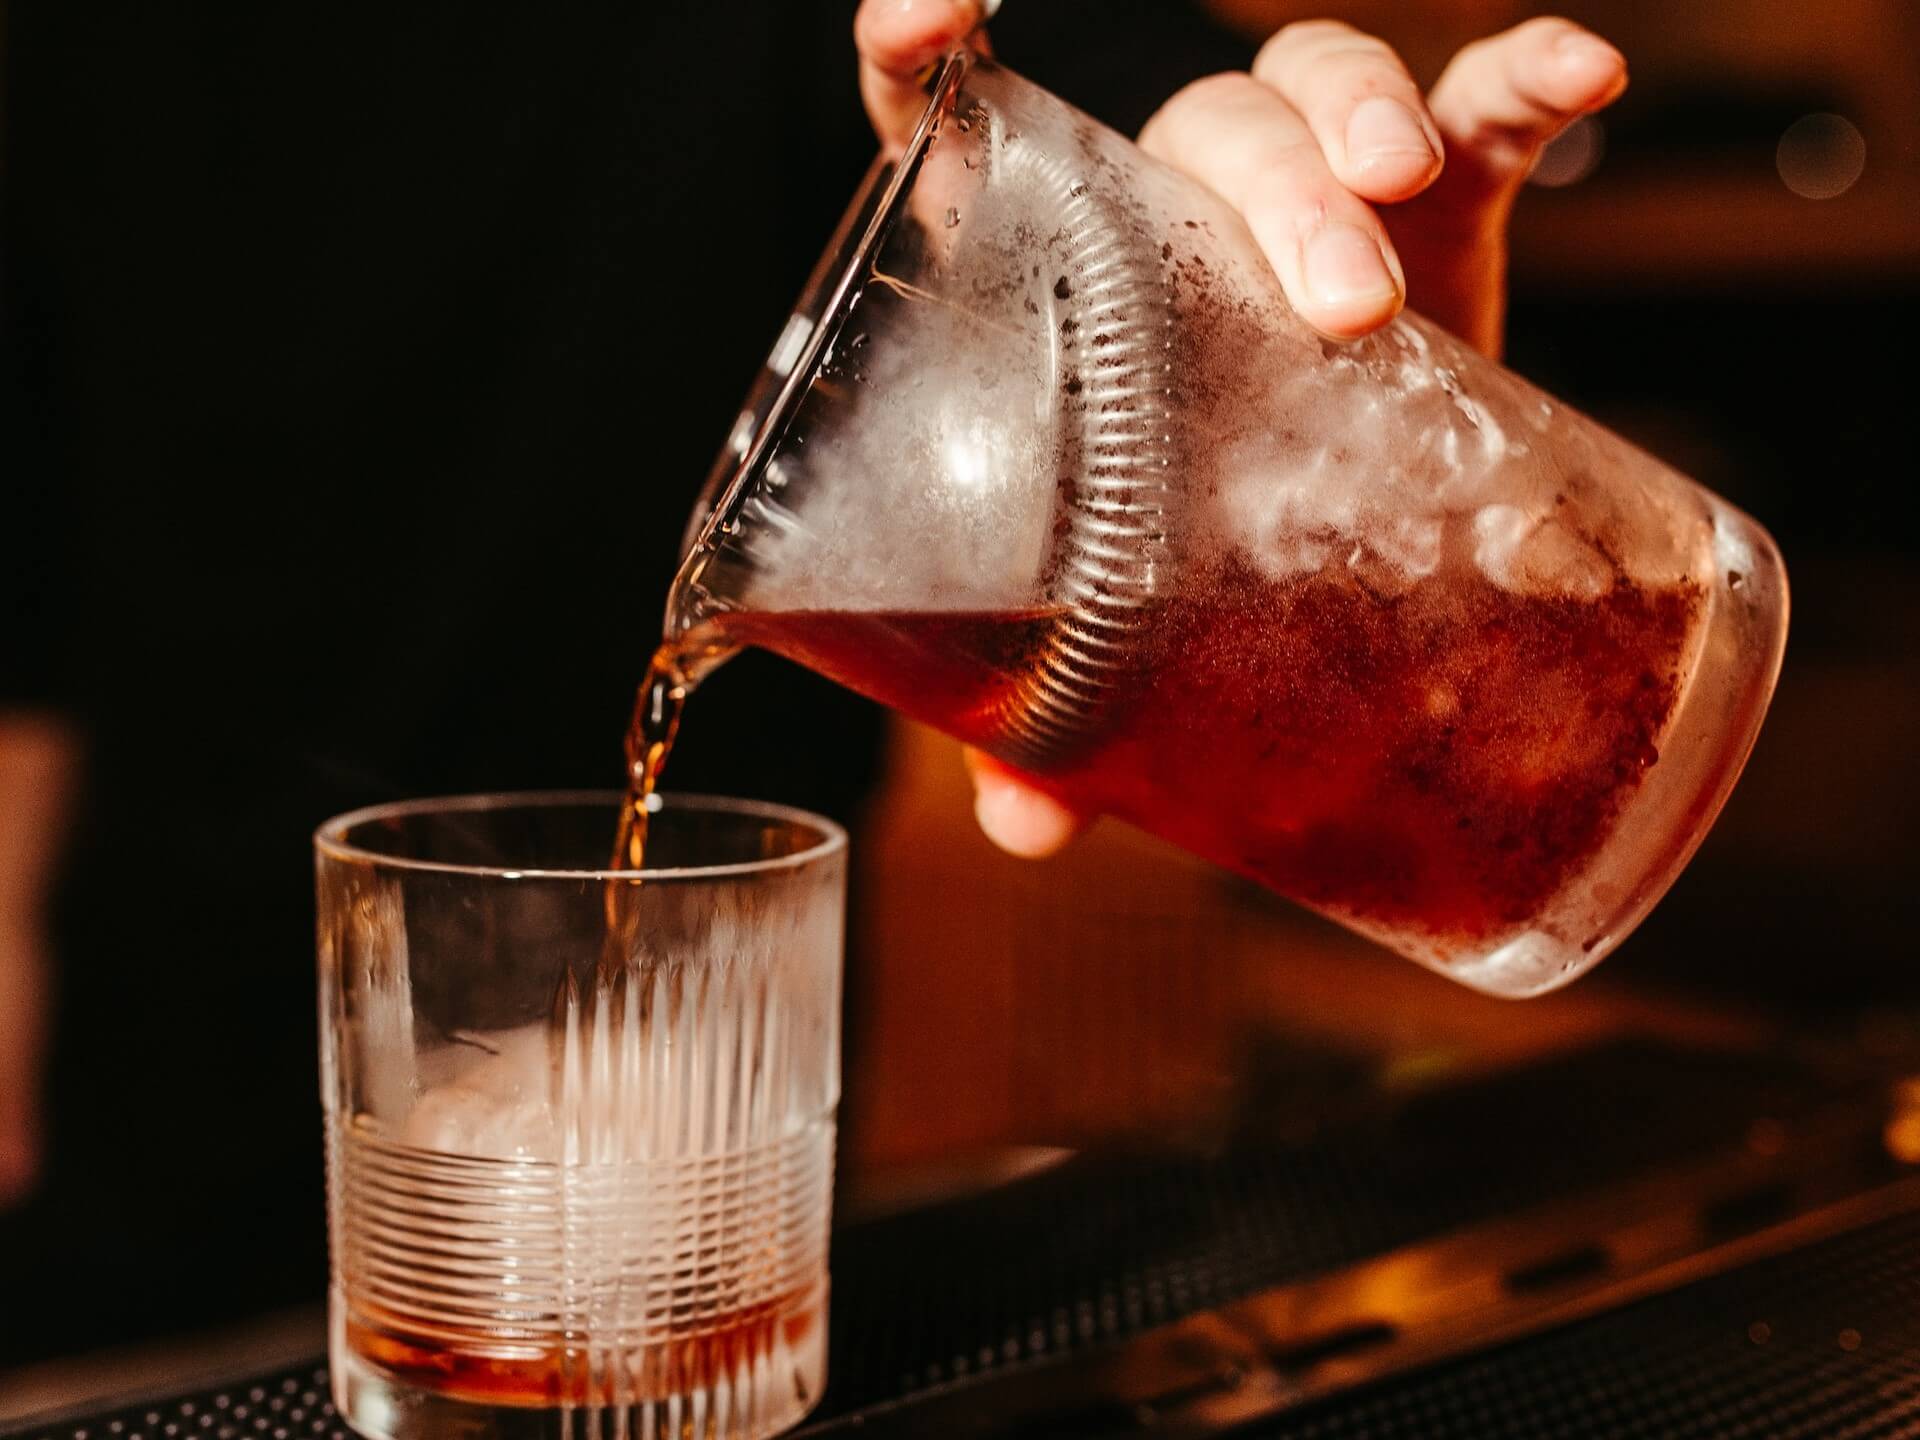 Bartender pouring Negroni into glass